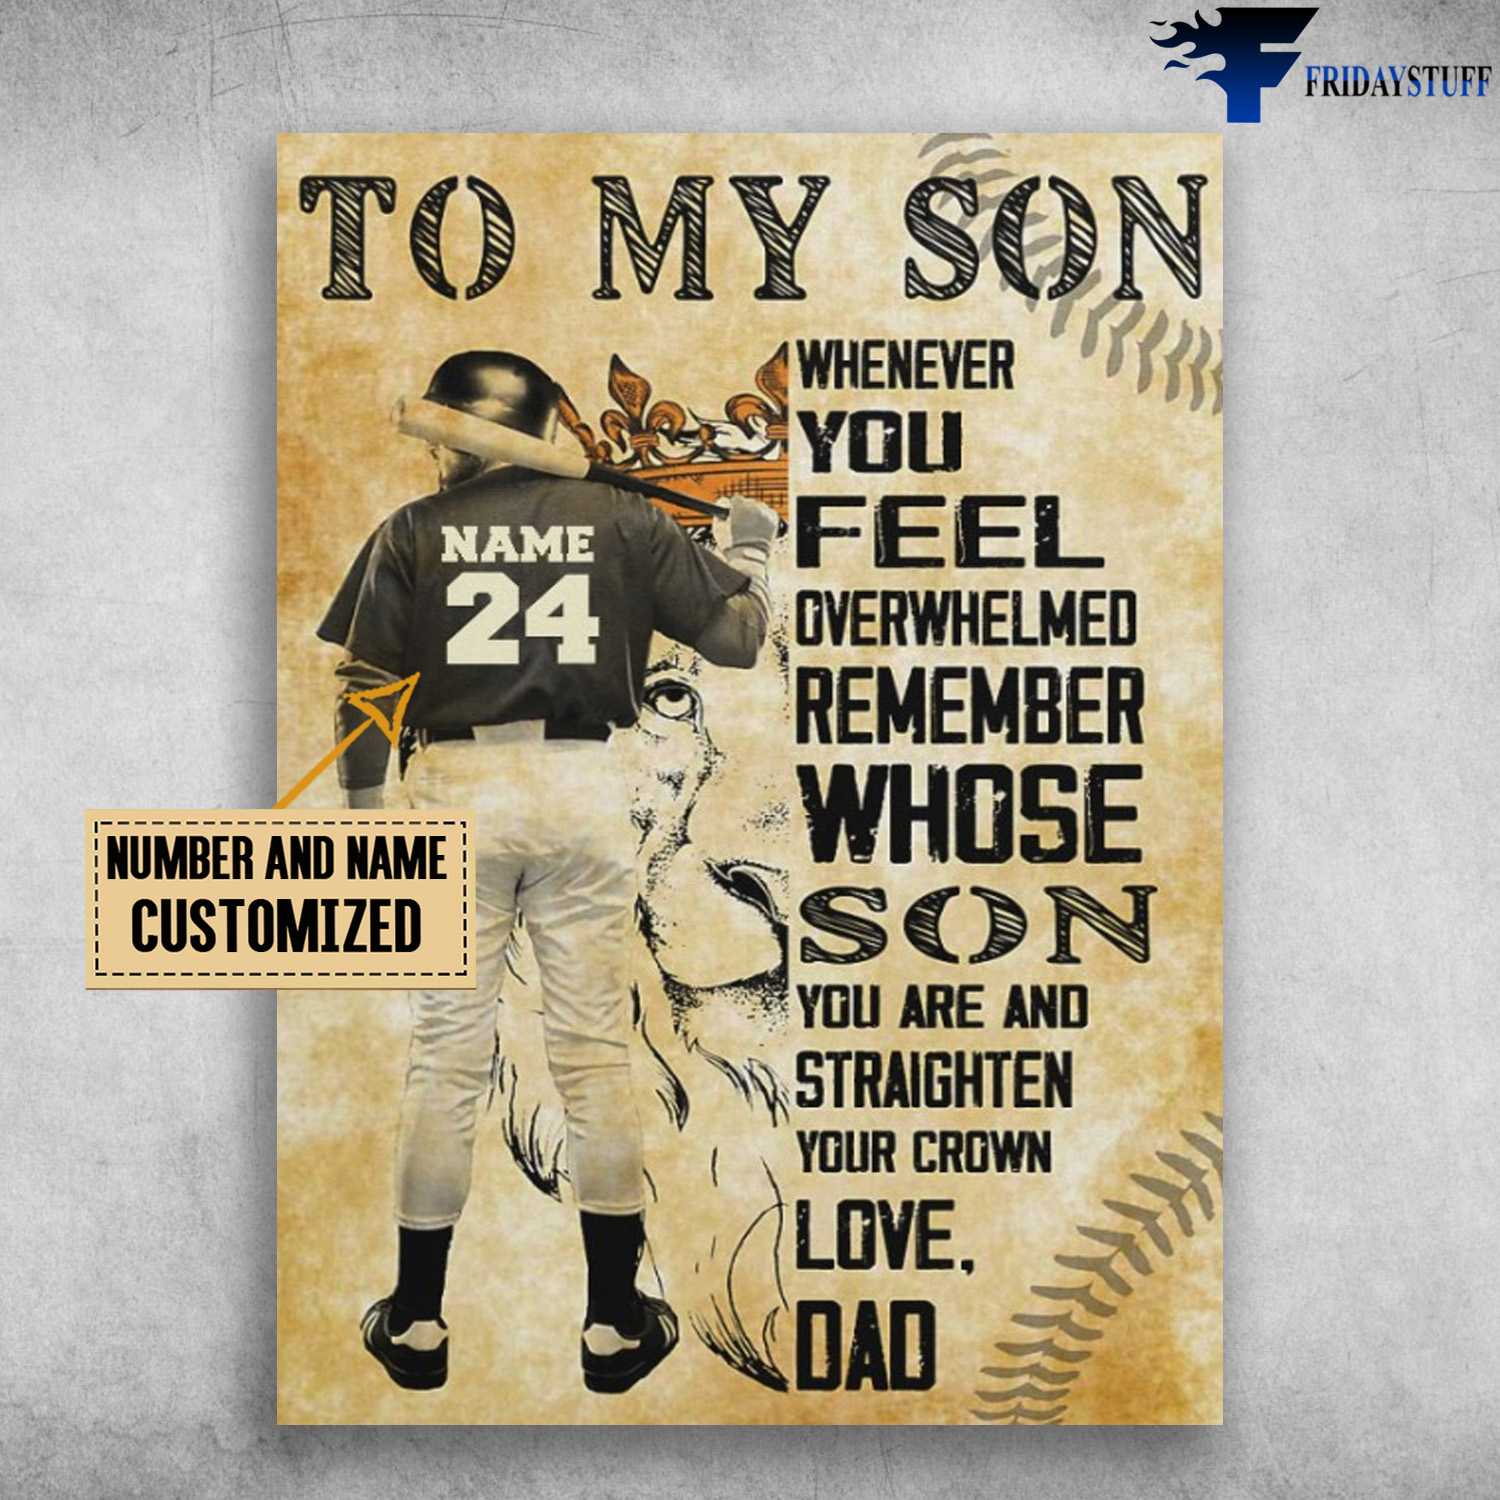 Baseball Son, Baseball Lover, Dad And Son, To My Son, Whenever You Feel Overwhelmed, Remember Whose Son You Are